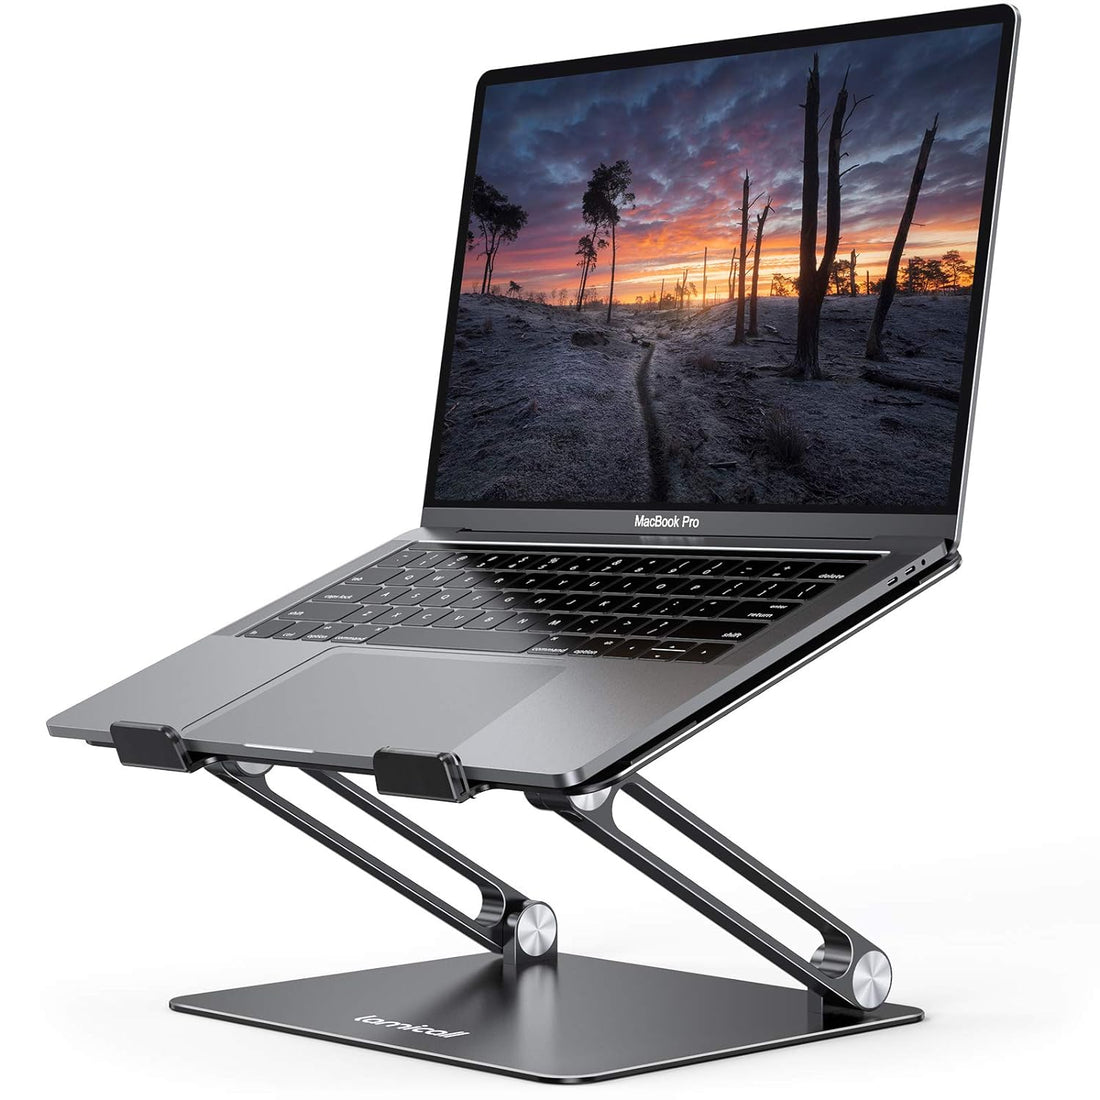 Lamicall Laptop Stand Riser Portable - Foldable Height Adjustable Ergonomic Computer Notebook Stand Holder Lift for Desk, Compatible with MacBook Air Pro, Dell XPS, HP (10-17'') - Black